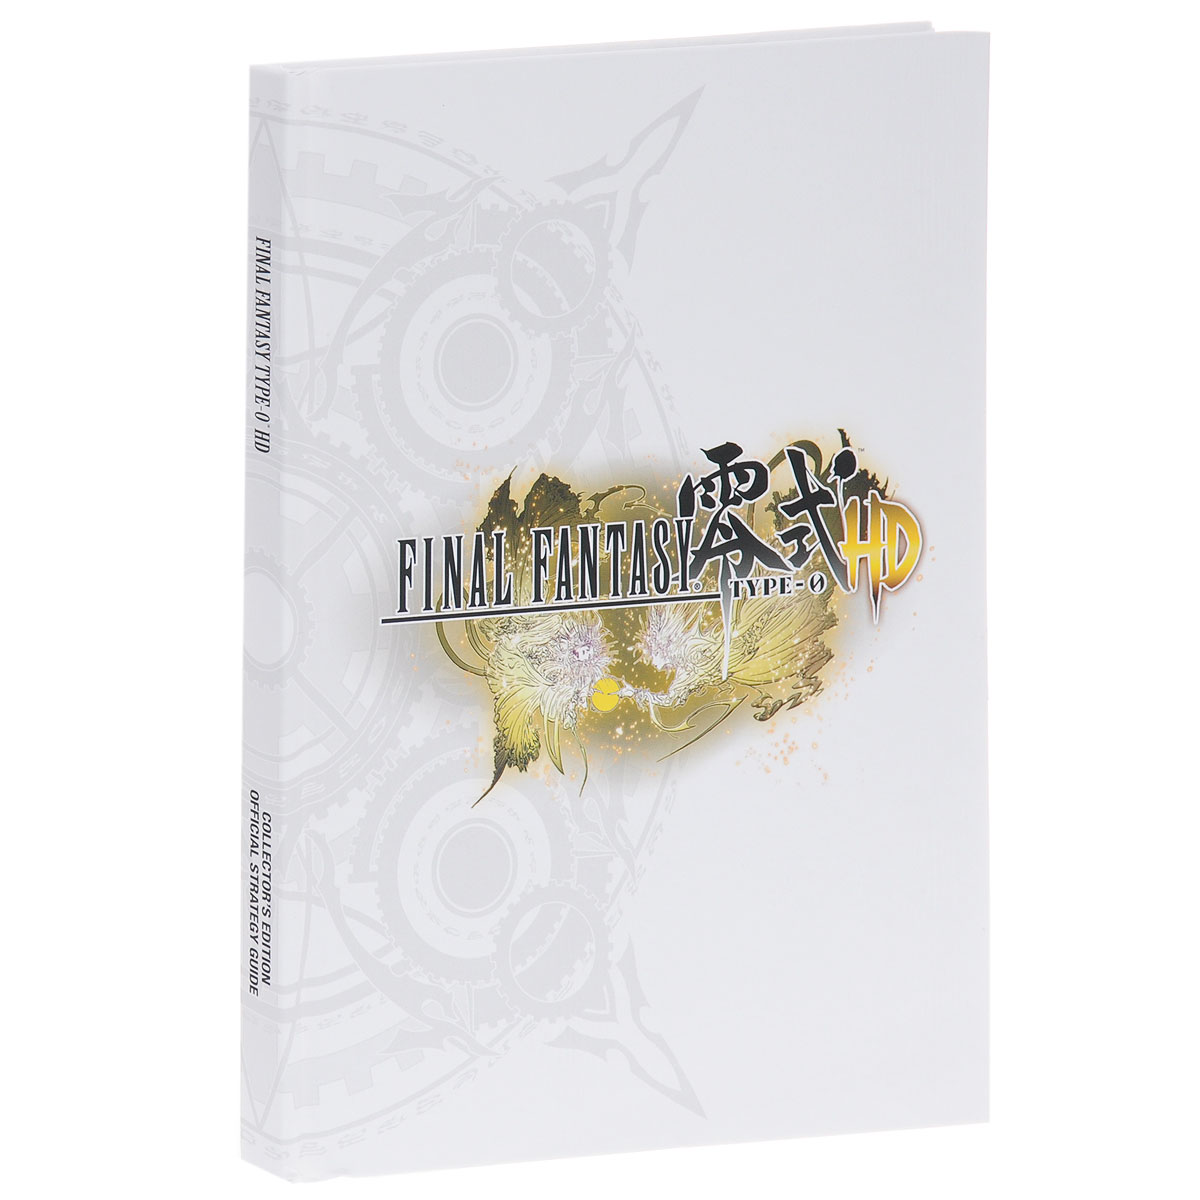 Final Fantasy Type 0-HD: Prima Official Game Guide